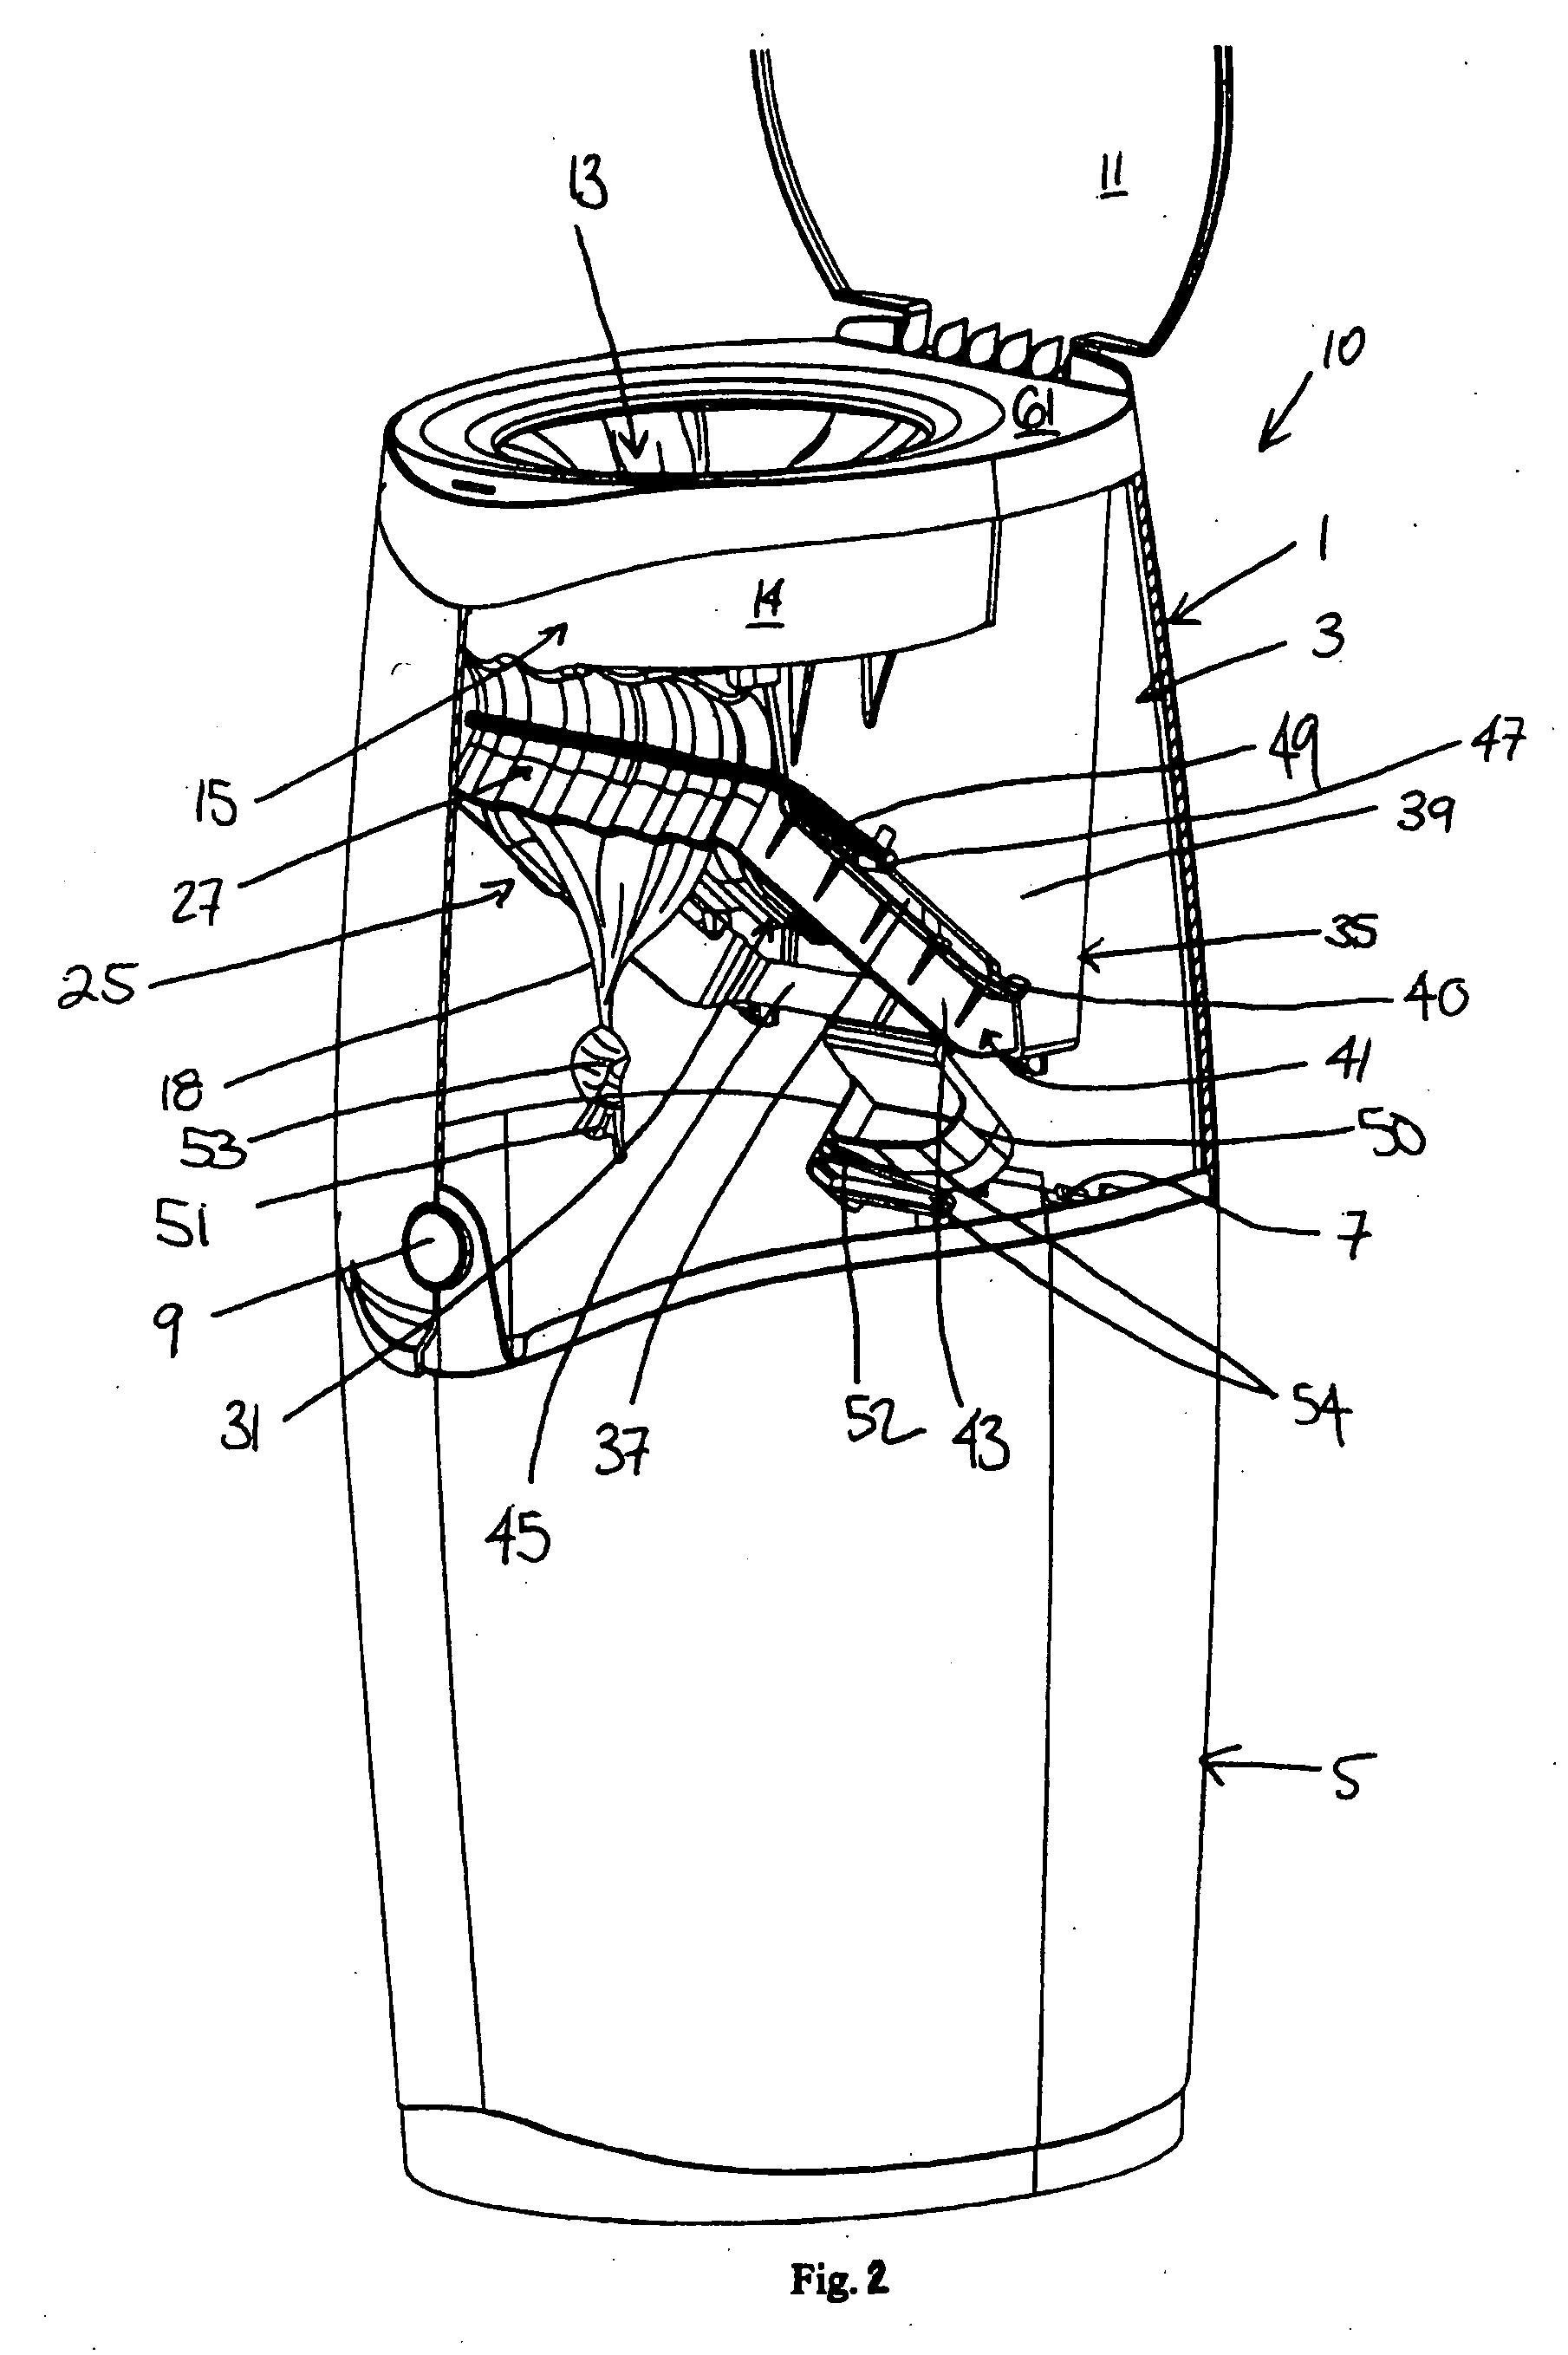 Apparatus for packing disposable objects into an elongated tube of flexible material